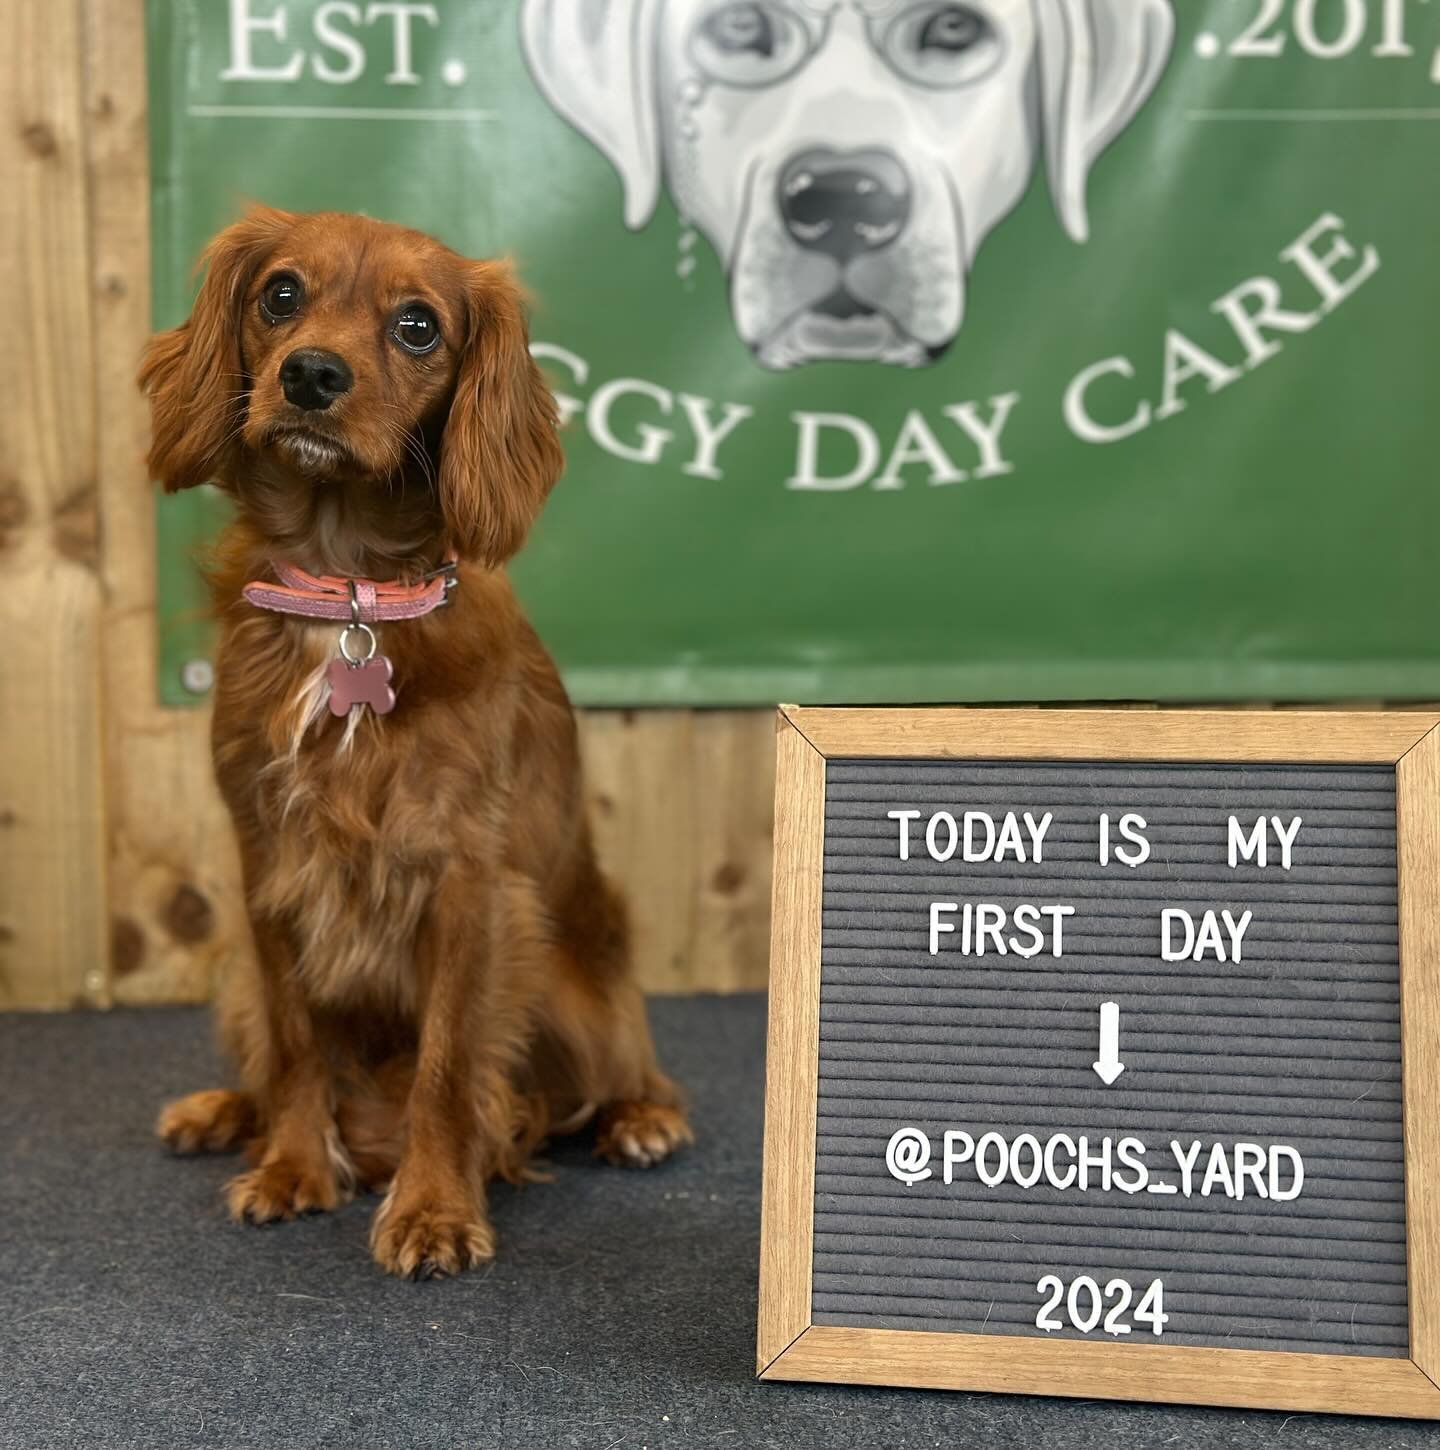 We&rsquo;ve got two adorable little new family members joining us today and the first up is Lola, a gorgeous Cavalier King Charles Spaniel!
&mdash;
Lola is living her best life and really enjoying her first day with us, Lola settled in very quickly a